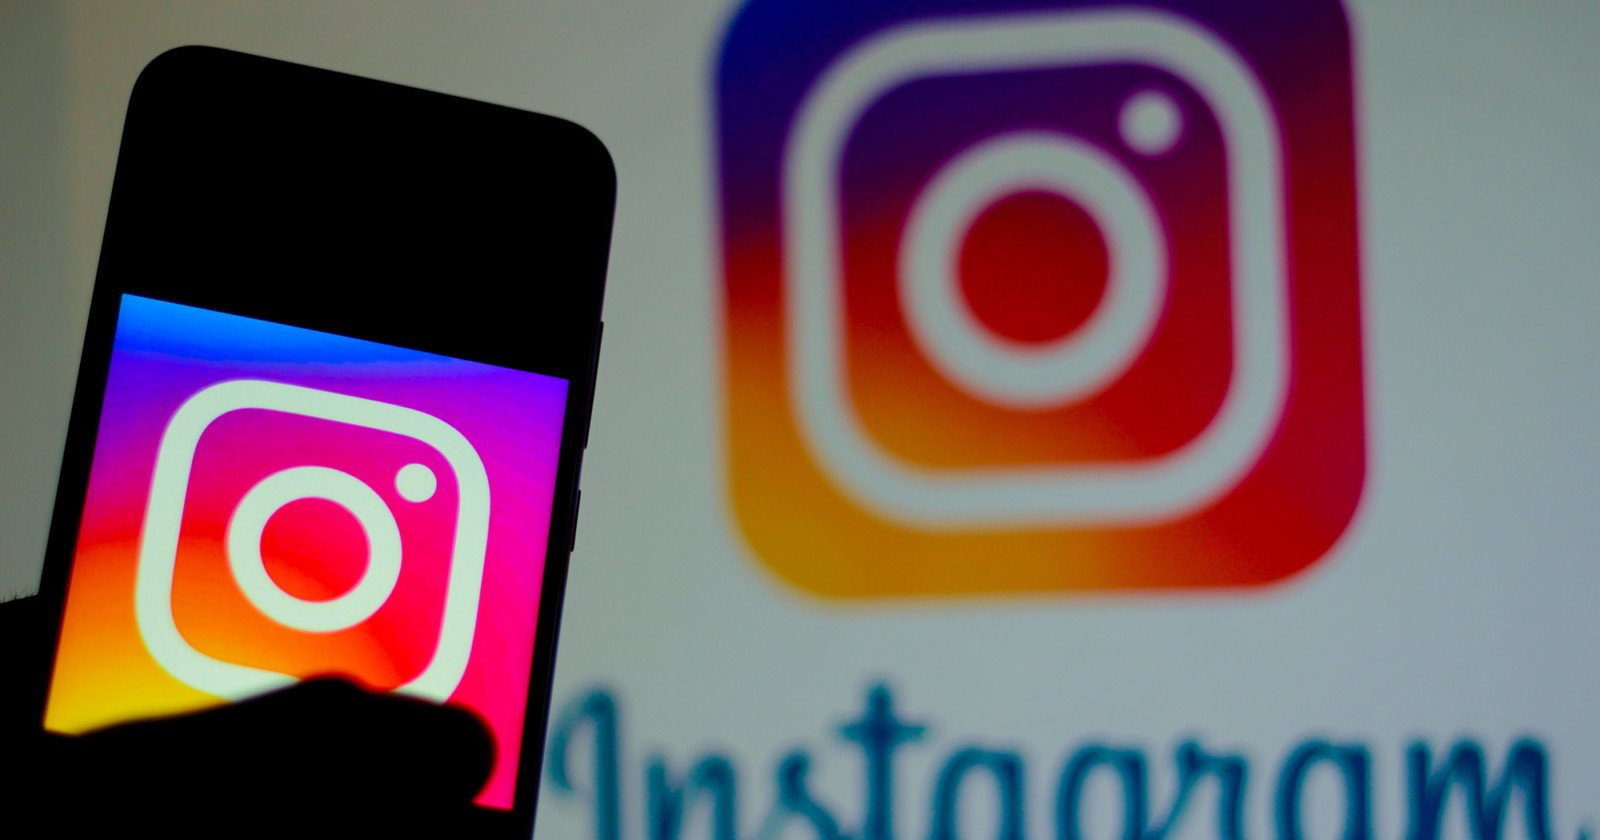 Instagram May Add a Nudity Protection Filter to Safeguard Users